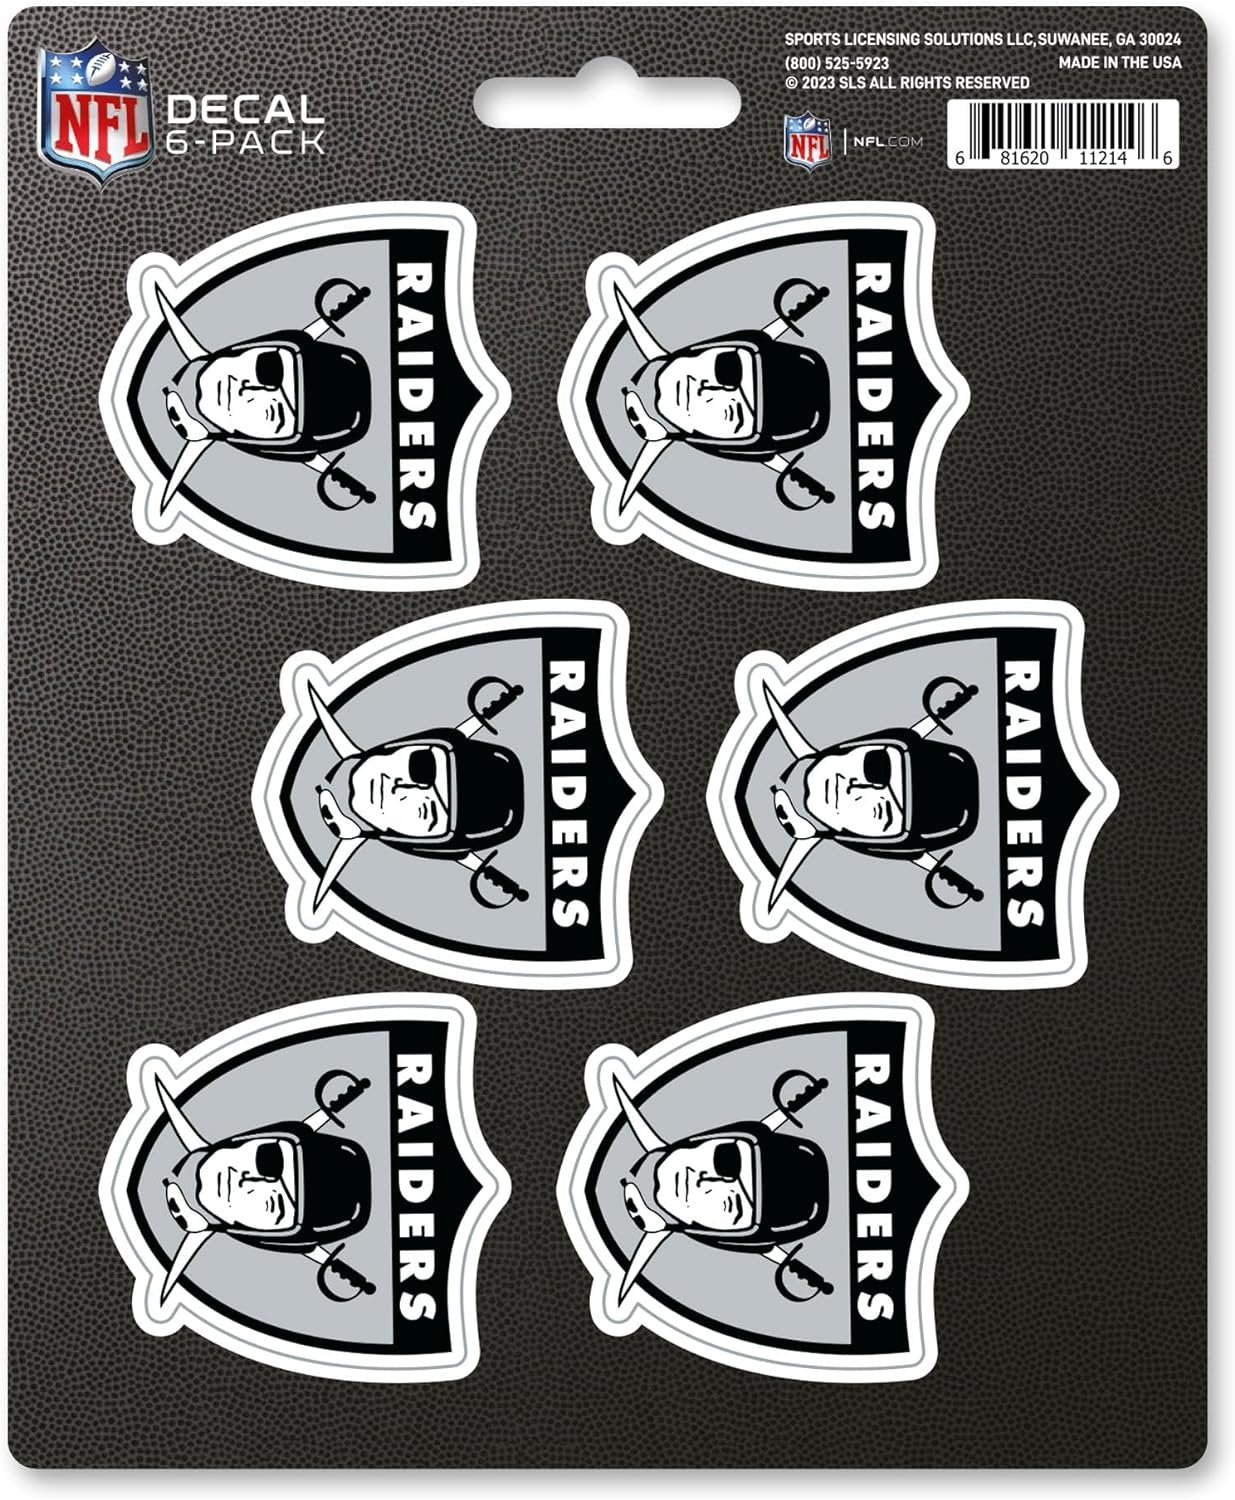 Las Vegas Raiders 6-Piece Decal Sticker Set, Vintage Retro Logo, 5x6 Inch Sheet, Gift for football fans for any hard surfaces around home, automotive, personal items